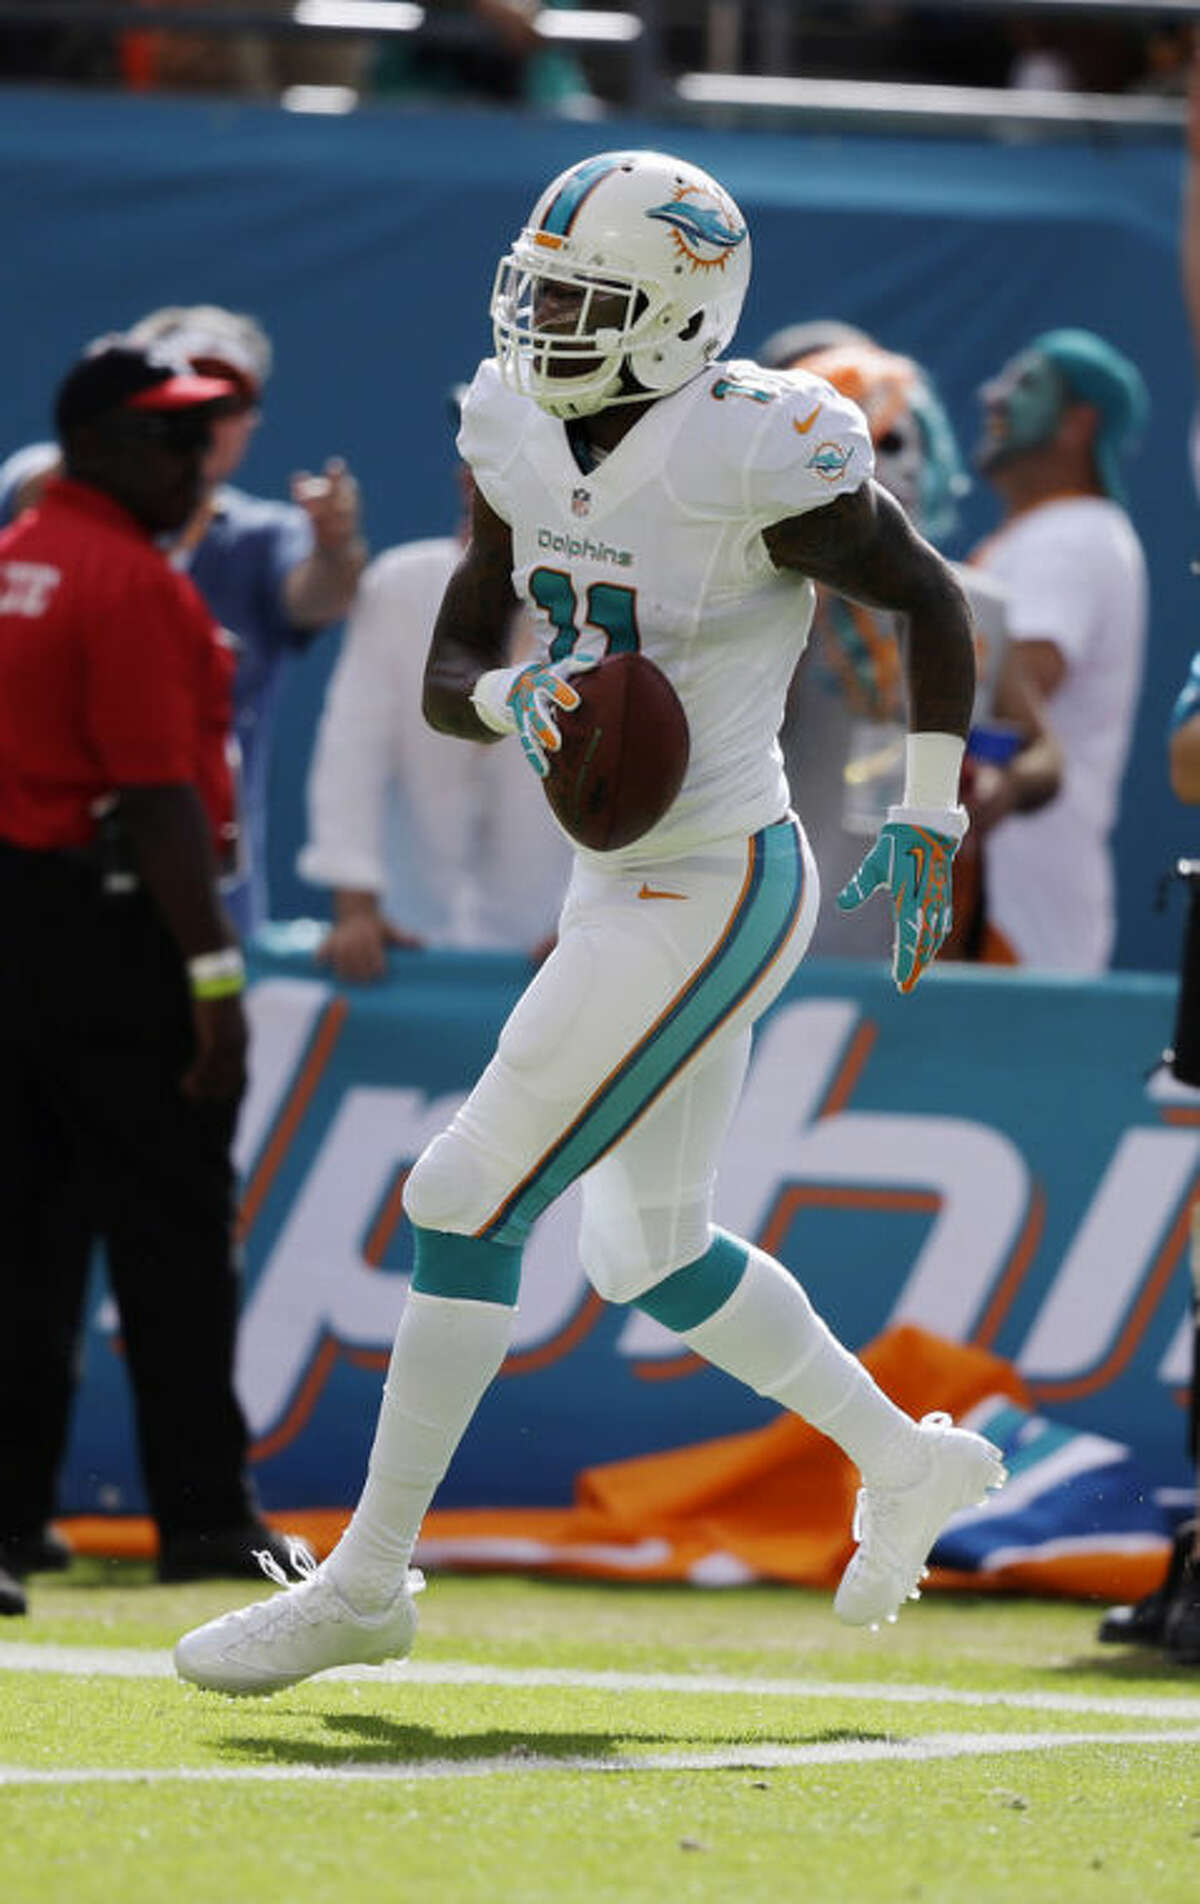 Miami Dolphins wide receiver Mike Wallace (11) scores a touchdown during the first half of an NFL football game against the Carolina Panthers, Sunday, Nov. 24, 2013, in Miami Gardens, Fla. (AP Photo/Lynne Sladky)